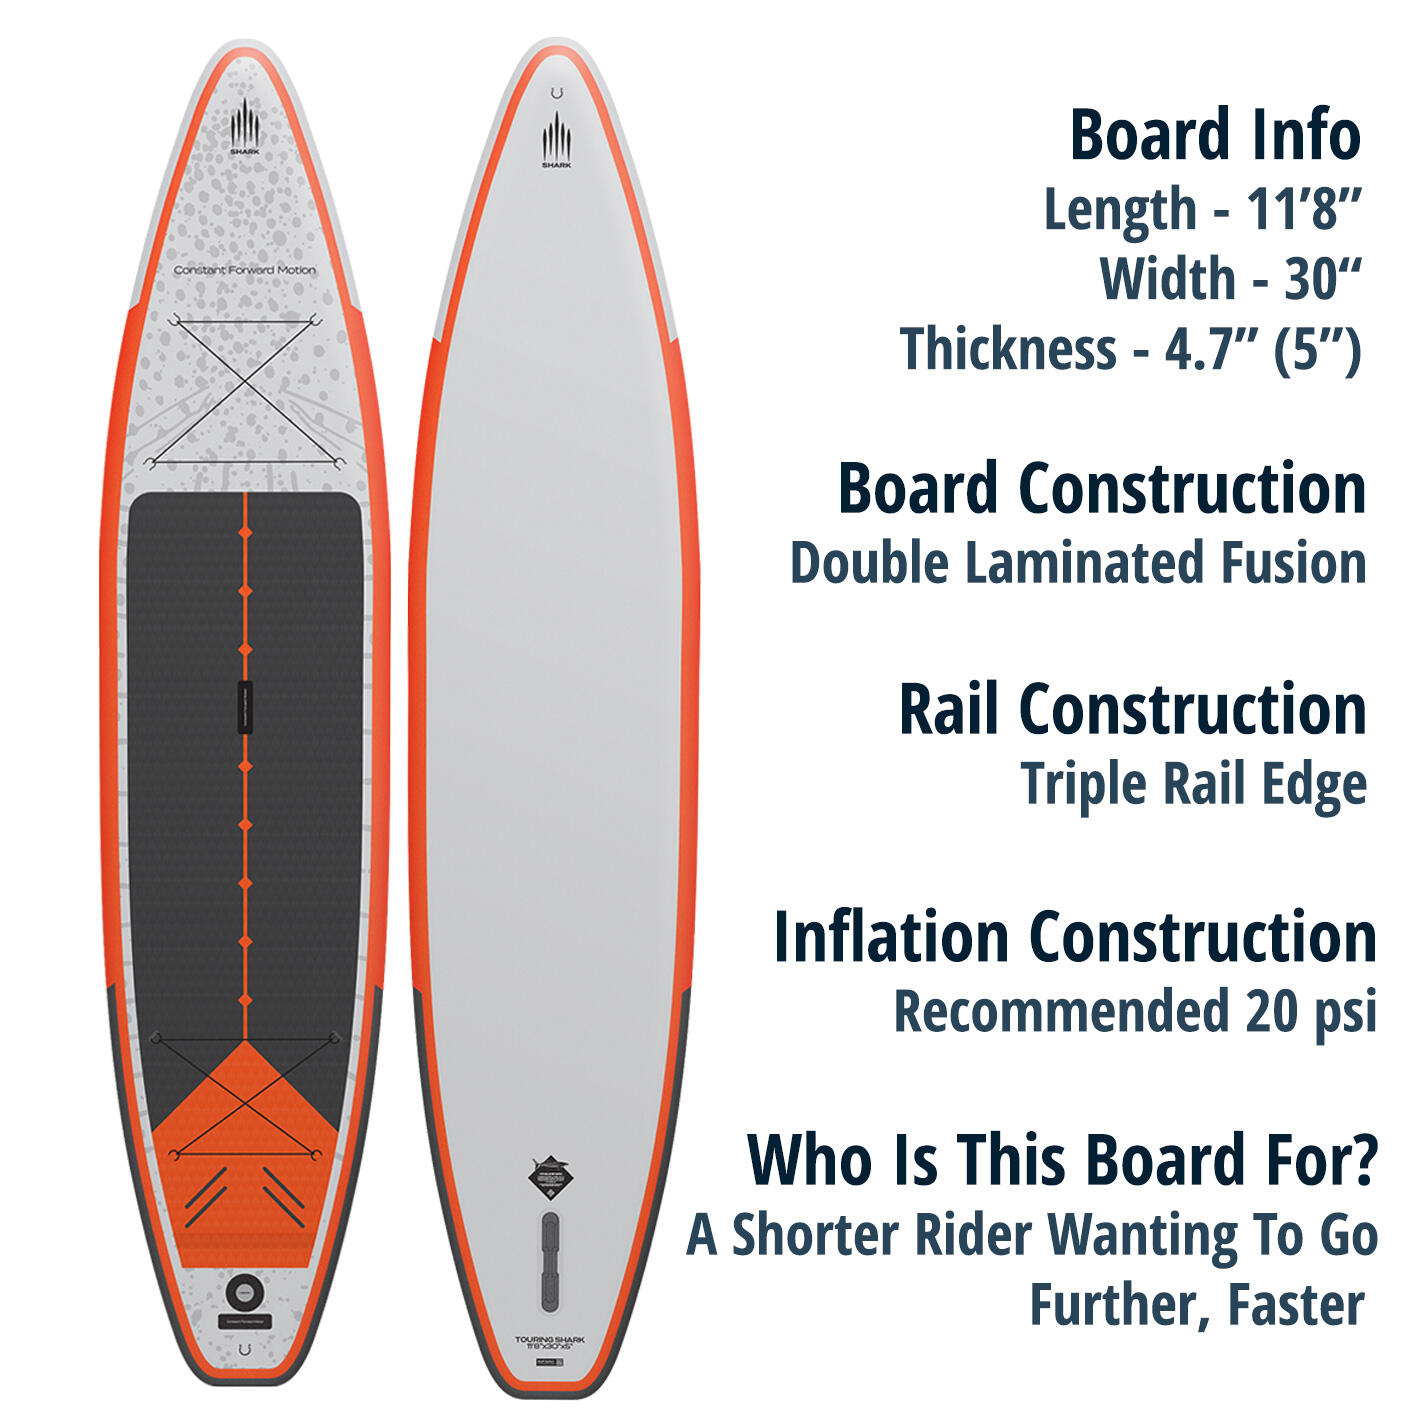 SHARK TOURING 11'8 x 30" x 5" FOR THE SHORTER RIDER 2/6